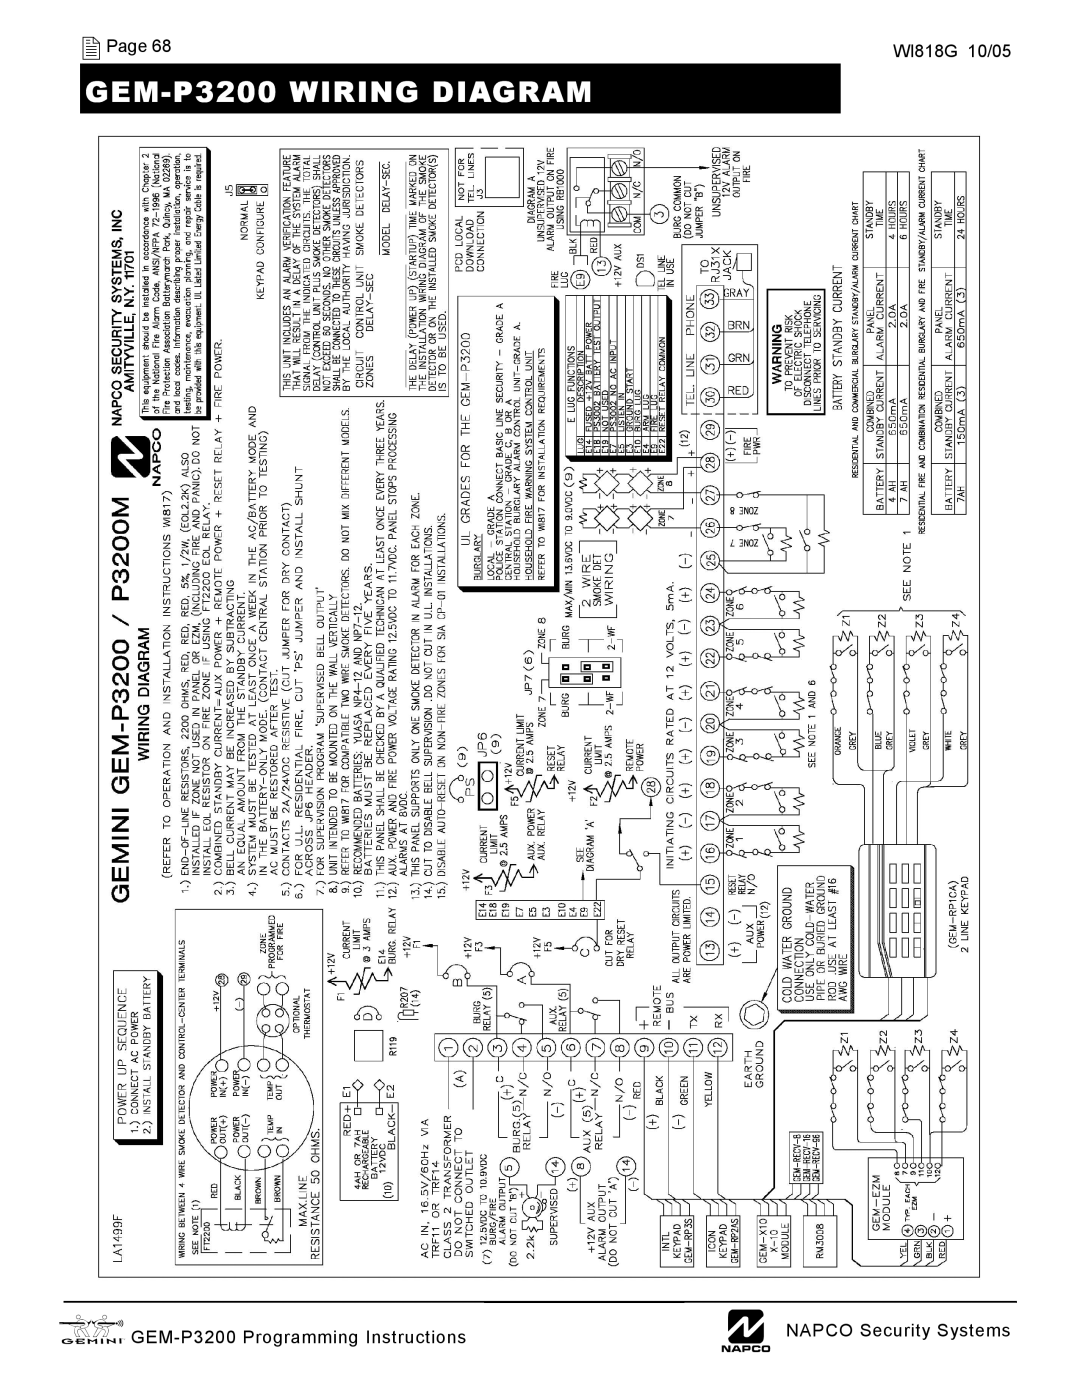 Napco Security Technologies quick start GEM-P3200WIRING DIAGRAM, Page, WI818G 10/05, XGEM-P3200Programming Instructions 